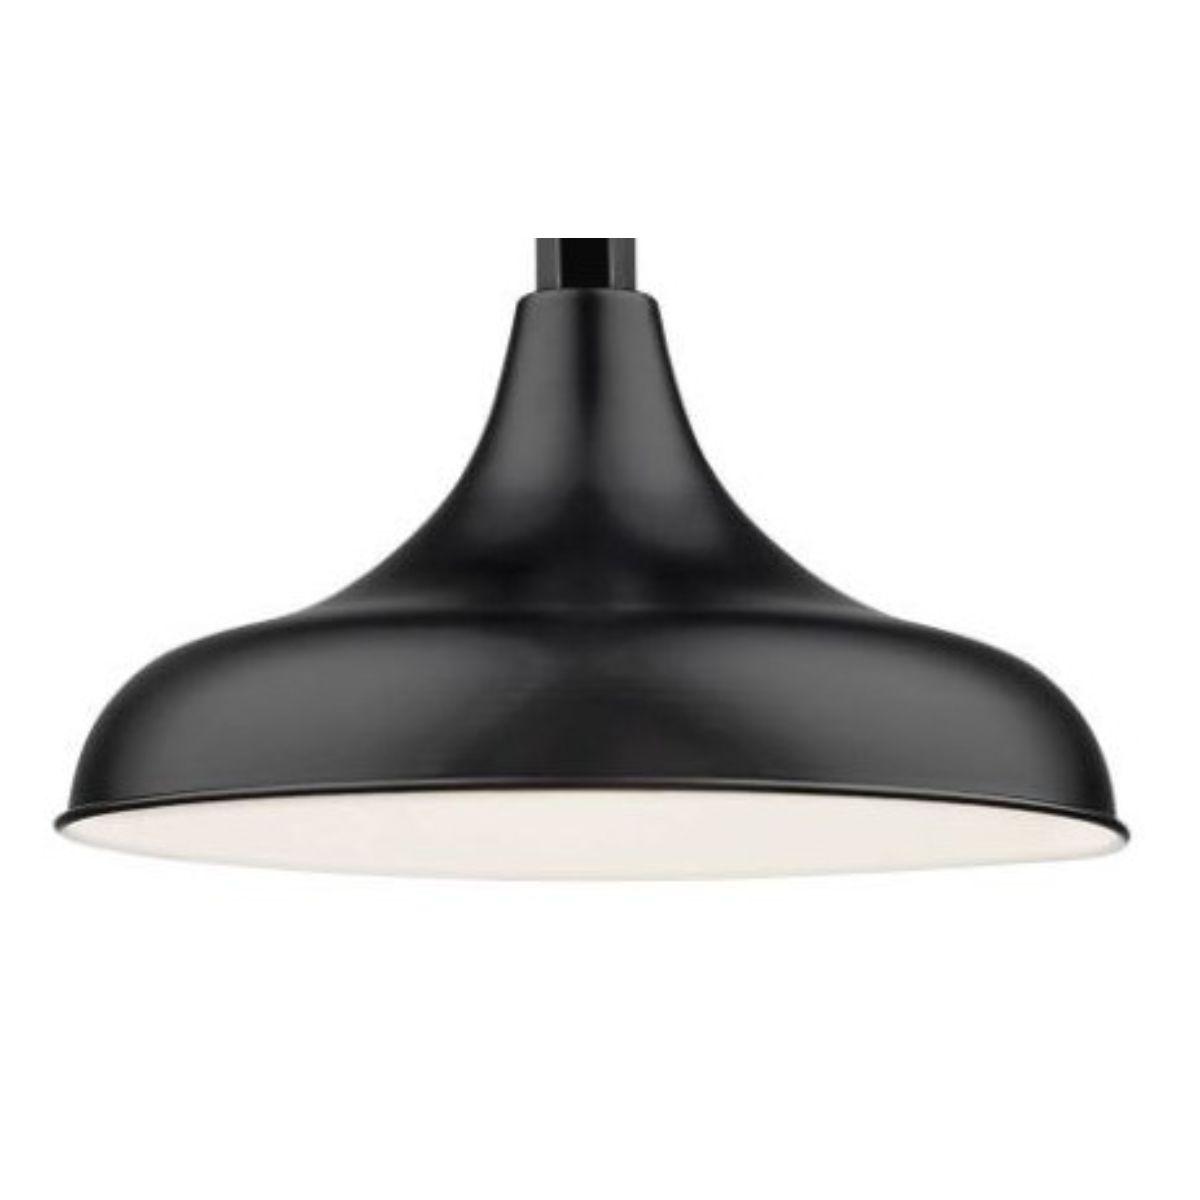 R Series 14 In. Satin Black Outdoor Modified Warehouse Shade with 3/4 In. Fitter